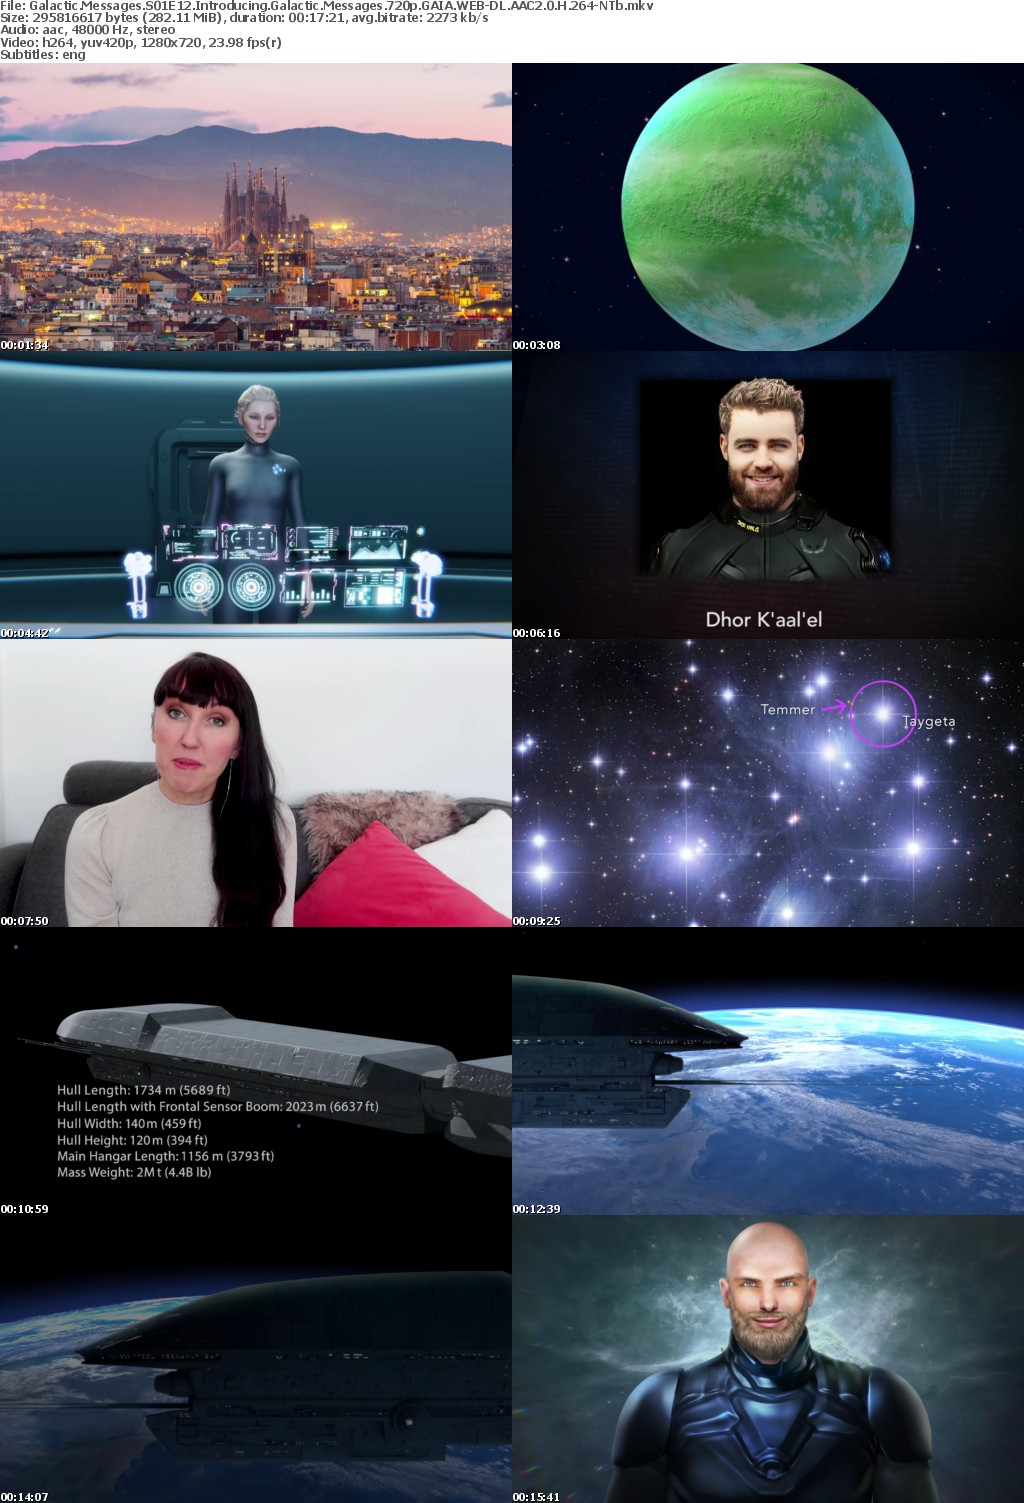 Galactic Messages S01E12 Introducing Galactic Messages 720p GAIA WEB-DL AAC2 0 H 264-NTb